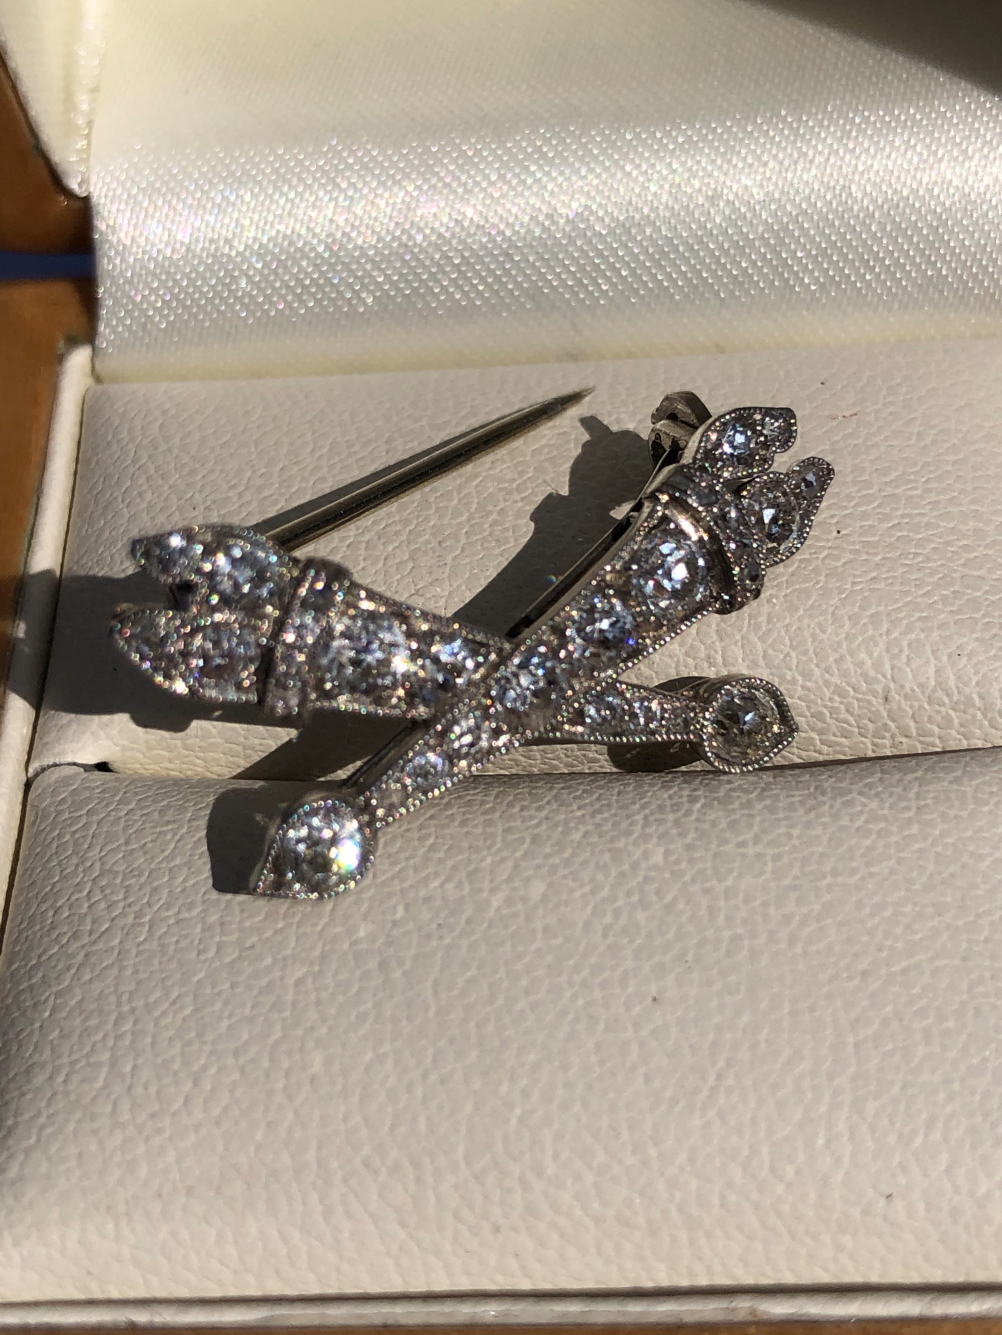 AN ANTIQUE DIAMOND SET BAR BROOCH DEPICTING CROSSED TORCHES, UNHALLMARKED ASSESSED AS PLATINUM - Image 6 of 6